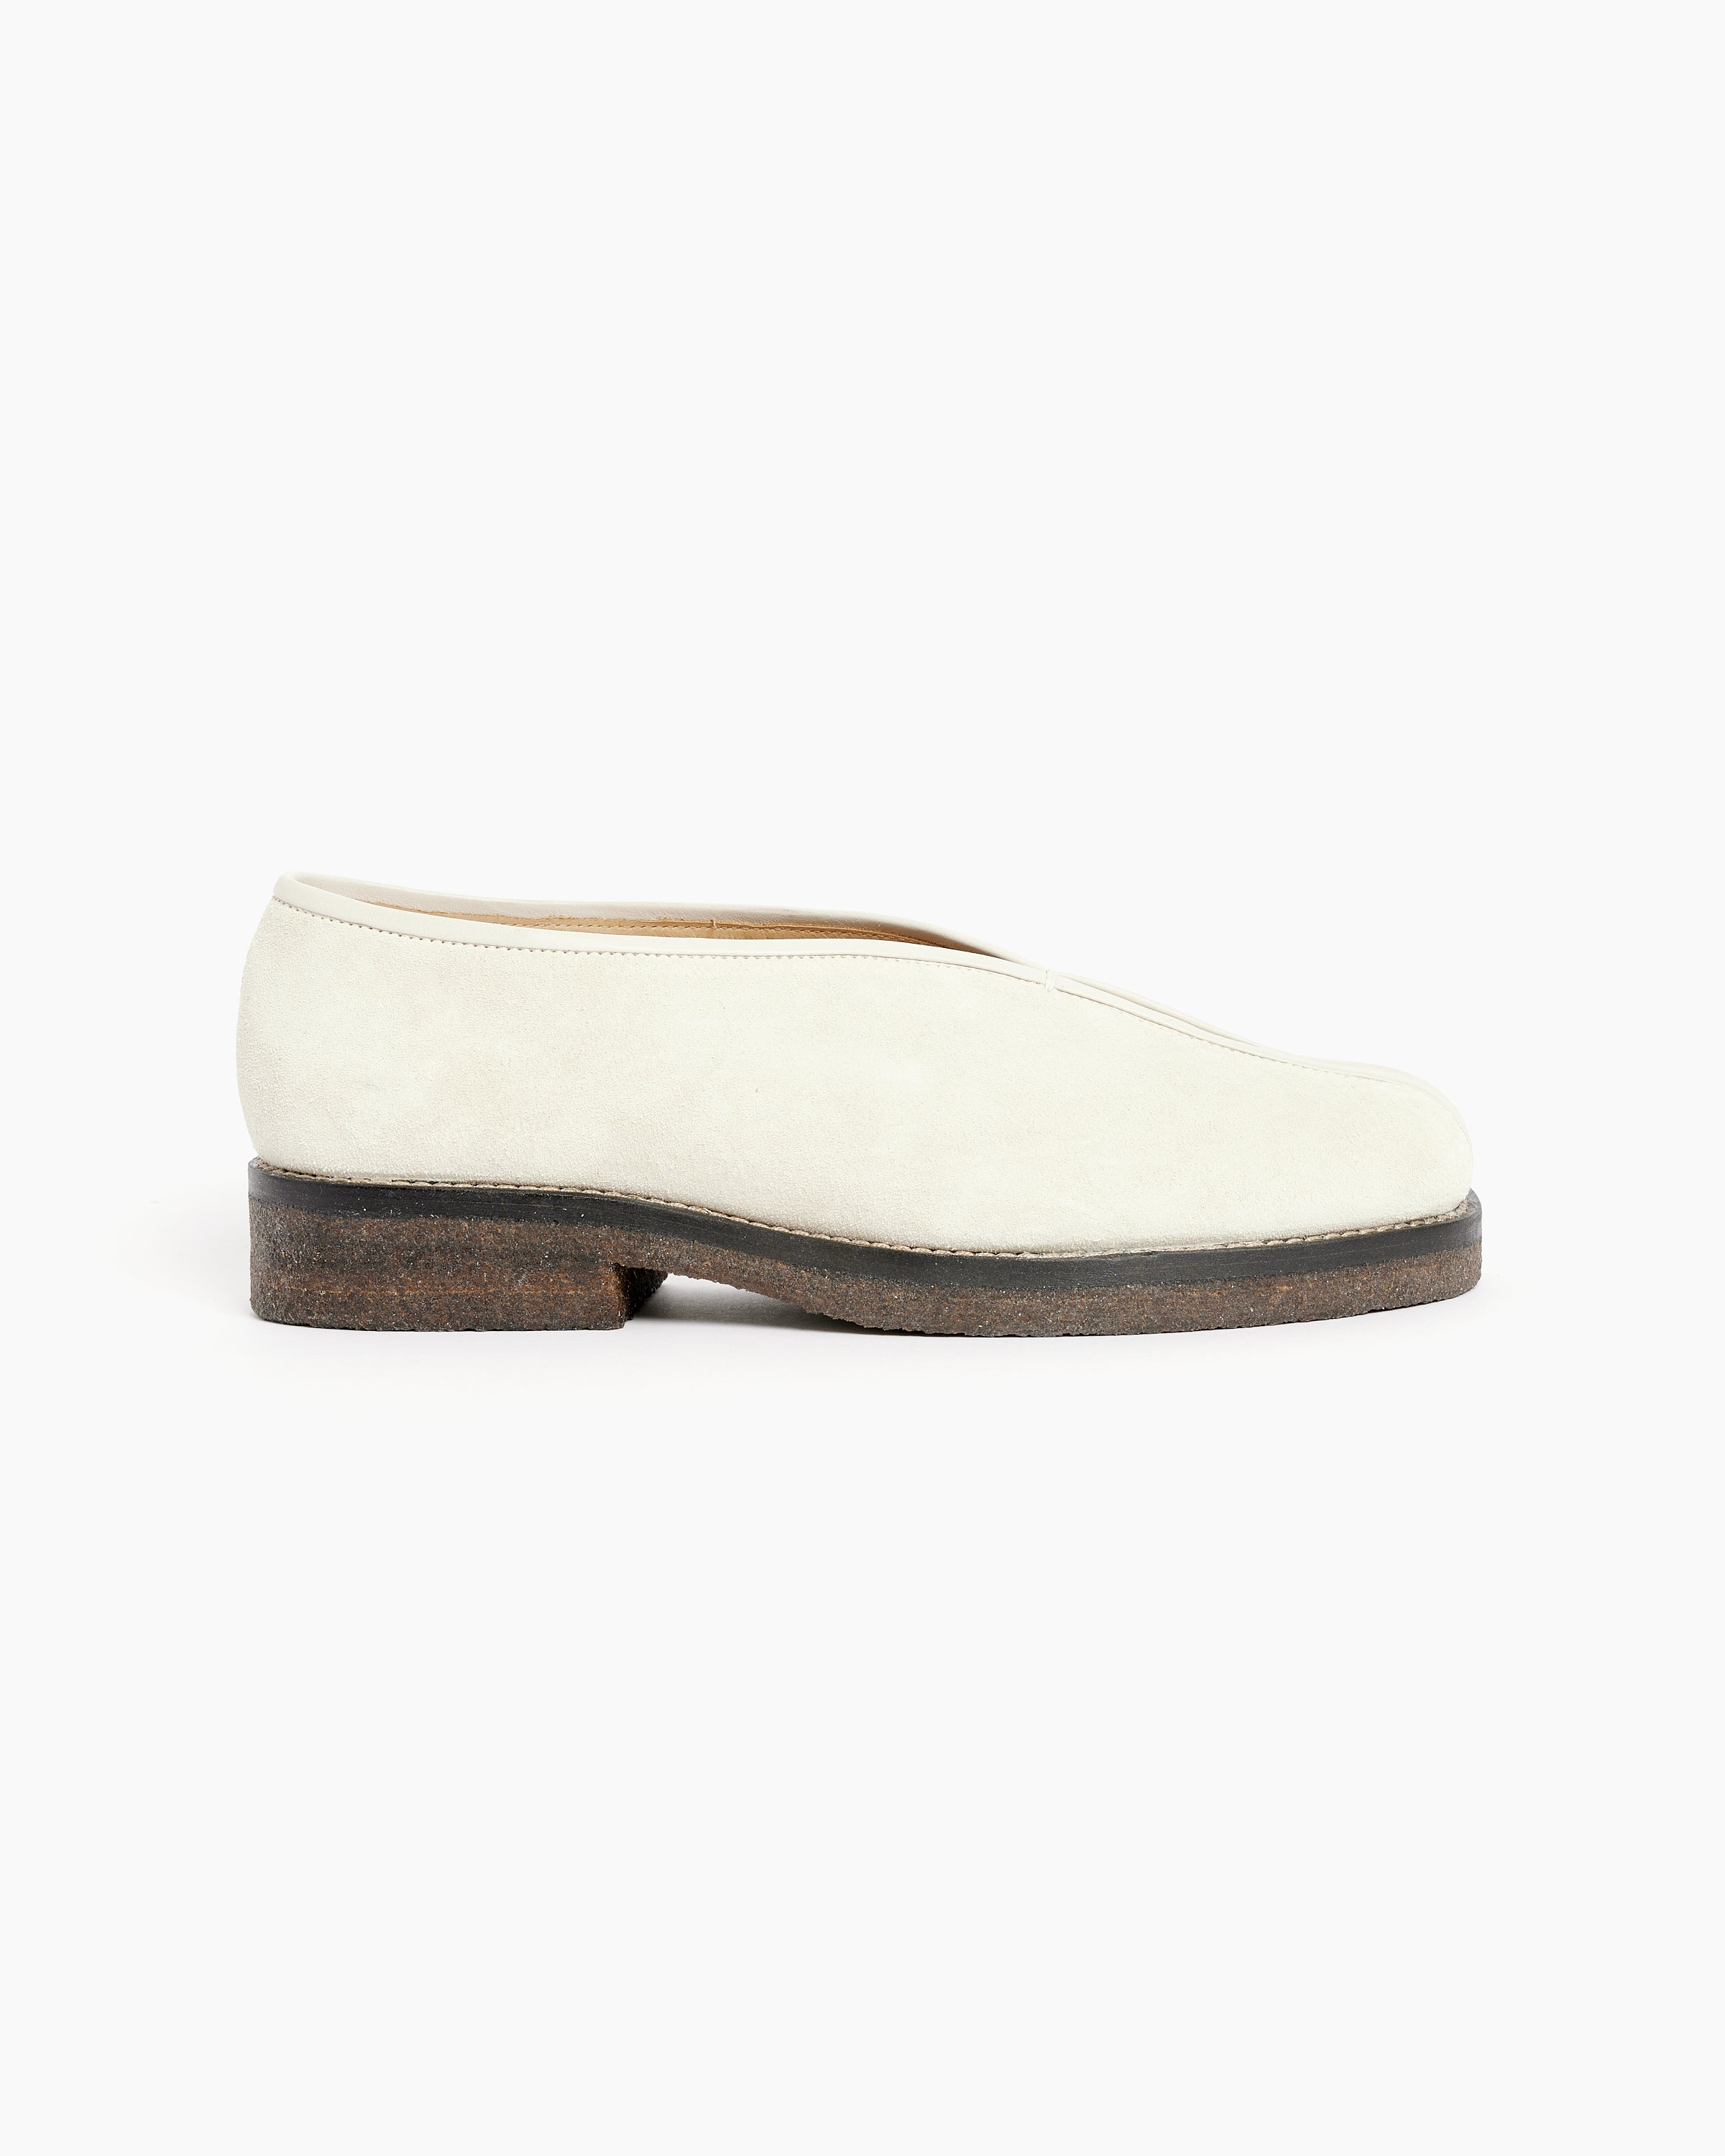 Piped Slippers in Misty Ivory – Mohawk General Store